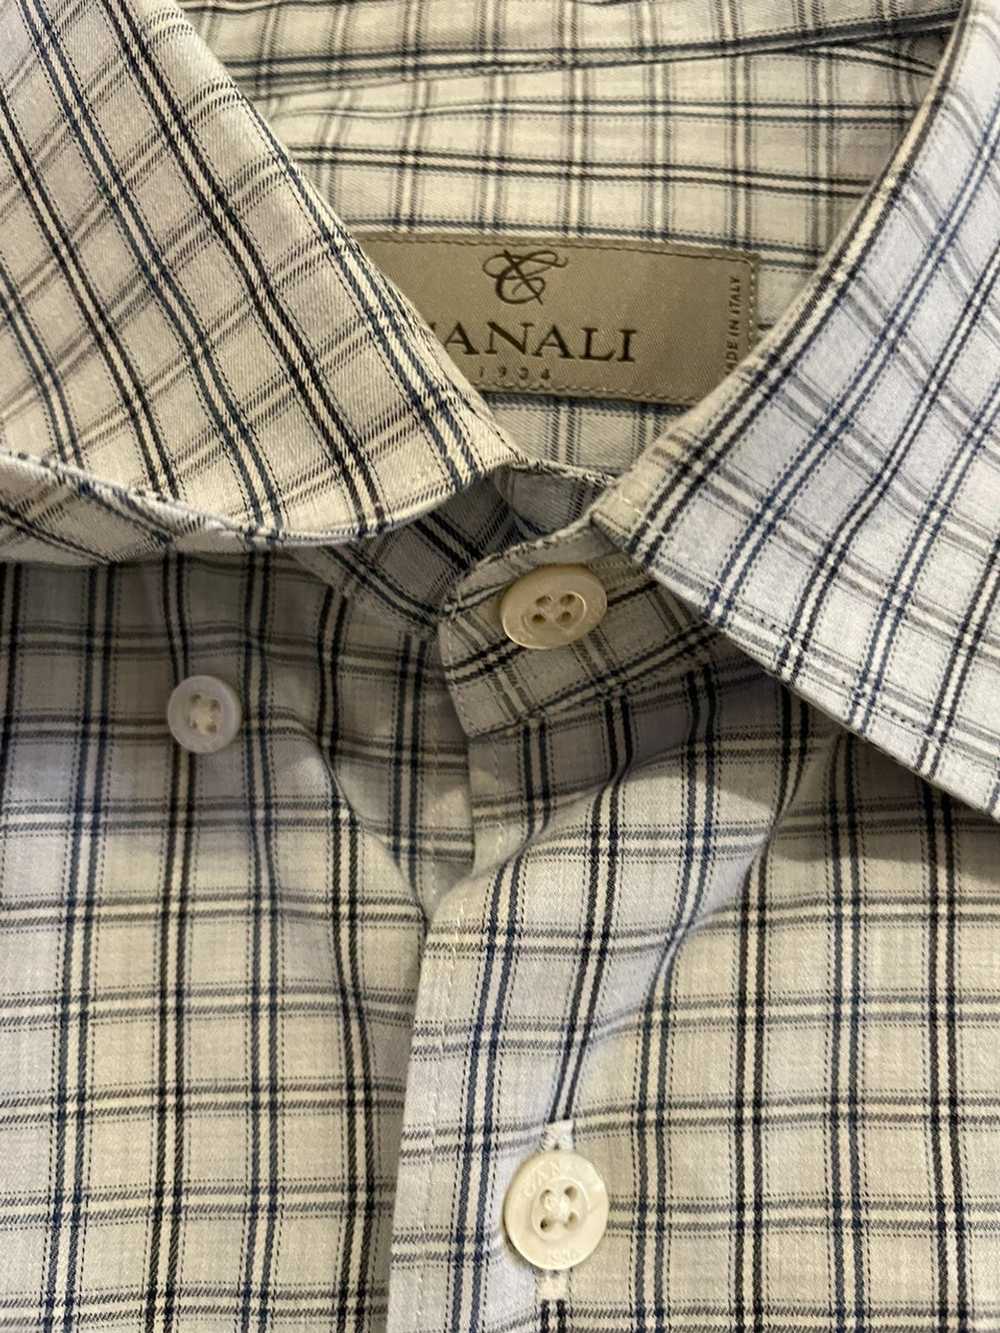 Canali Double Grid Check Shirt - image 6